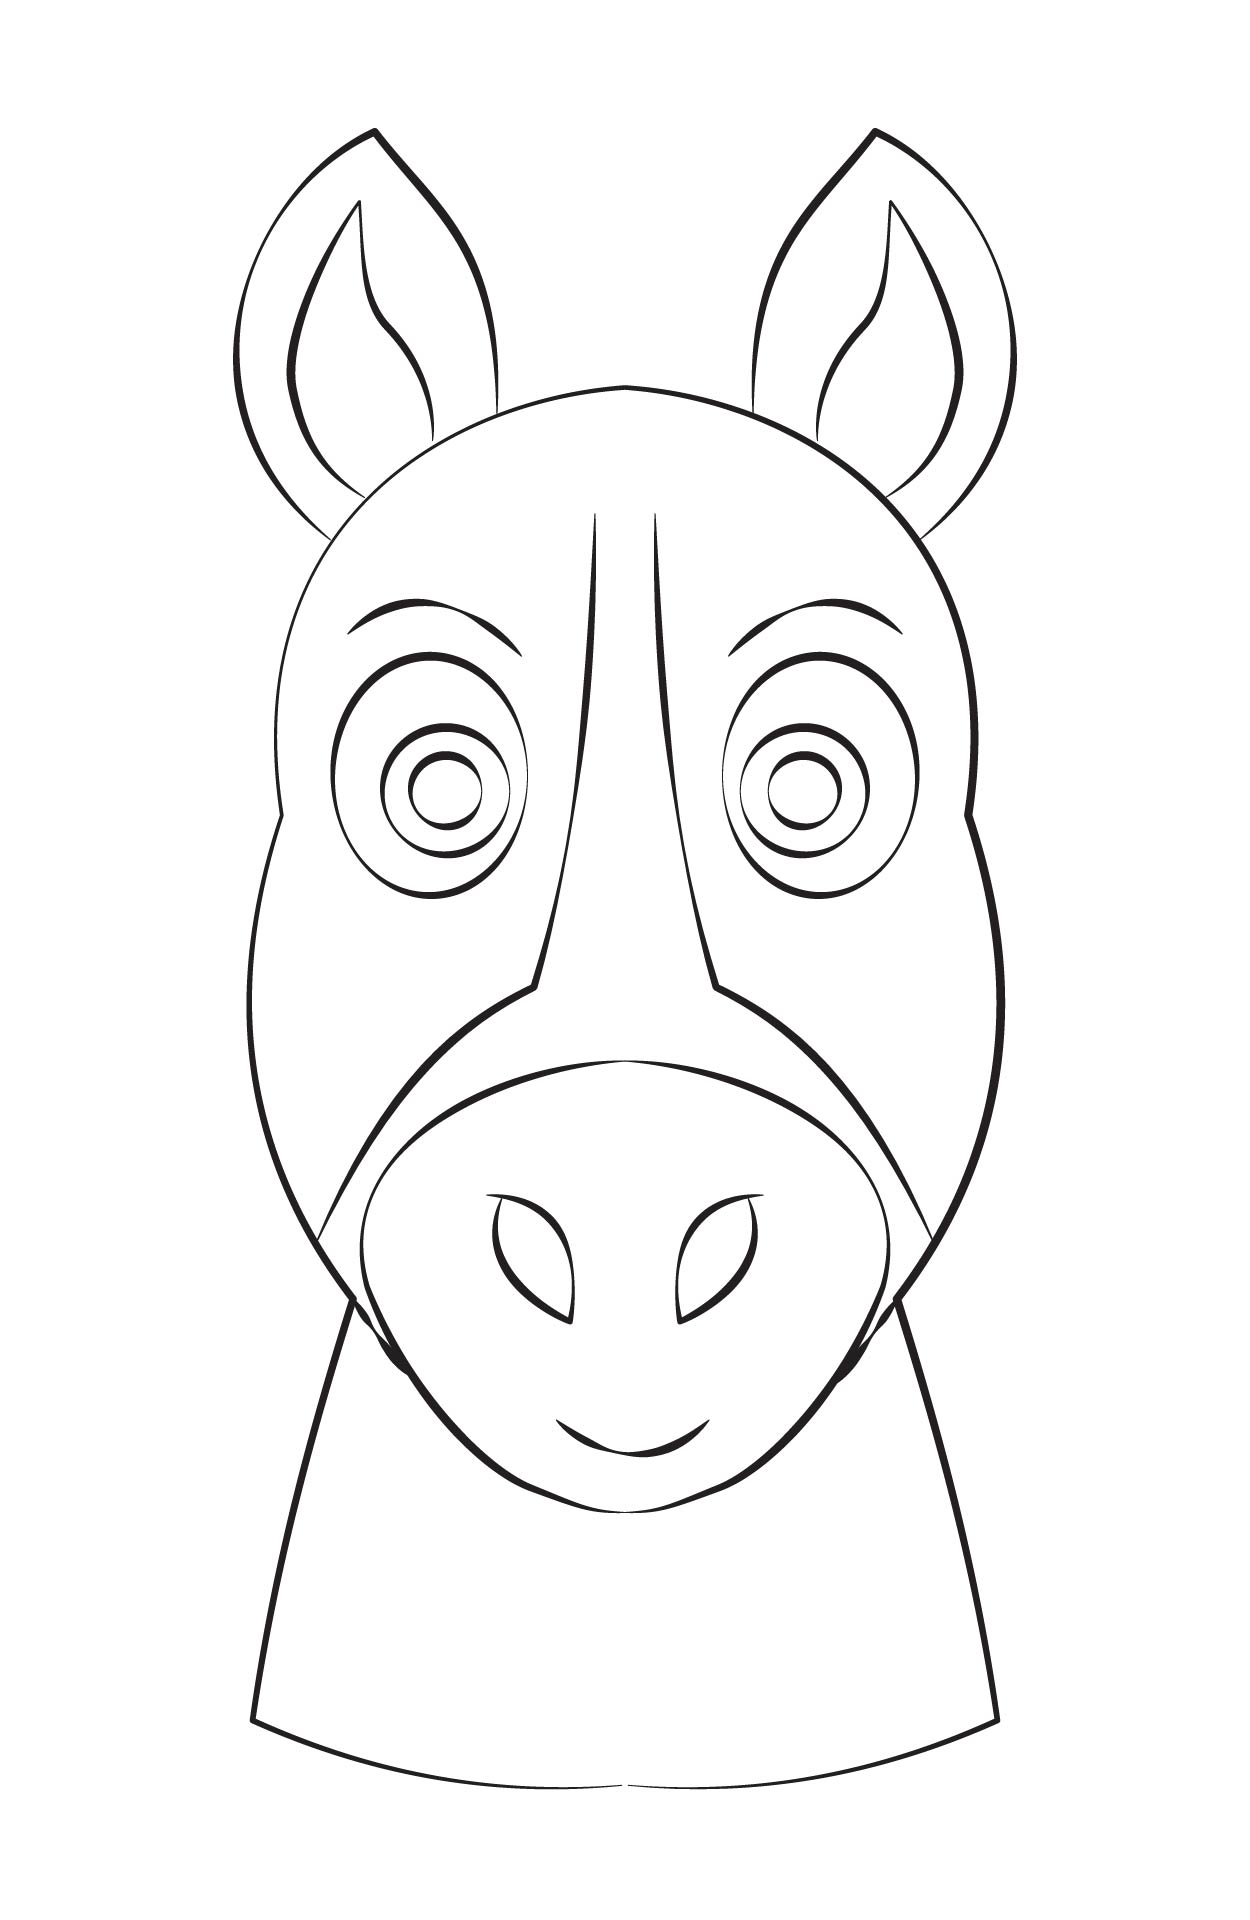 Horse Face Printable for Classroom Activity